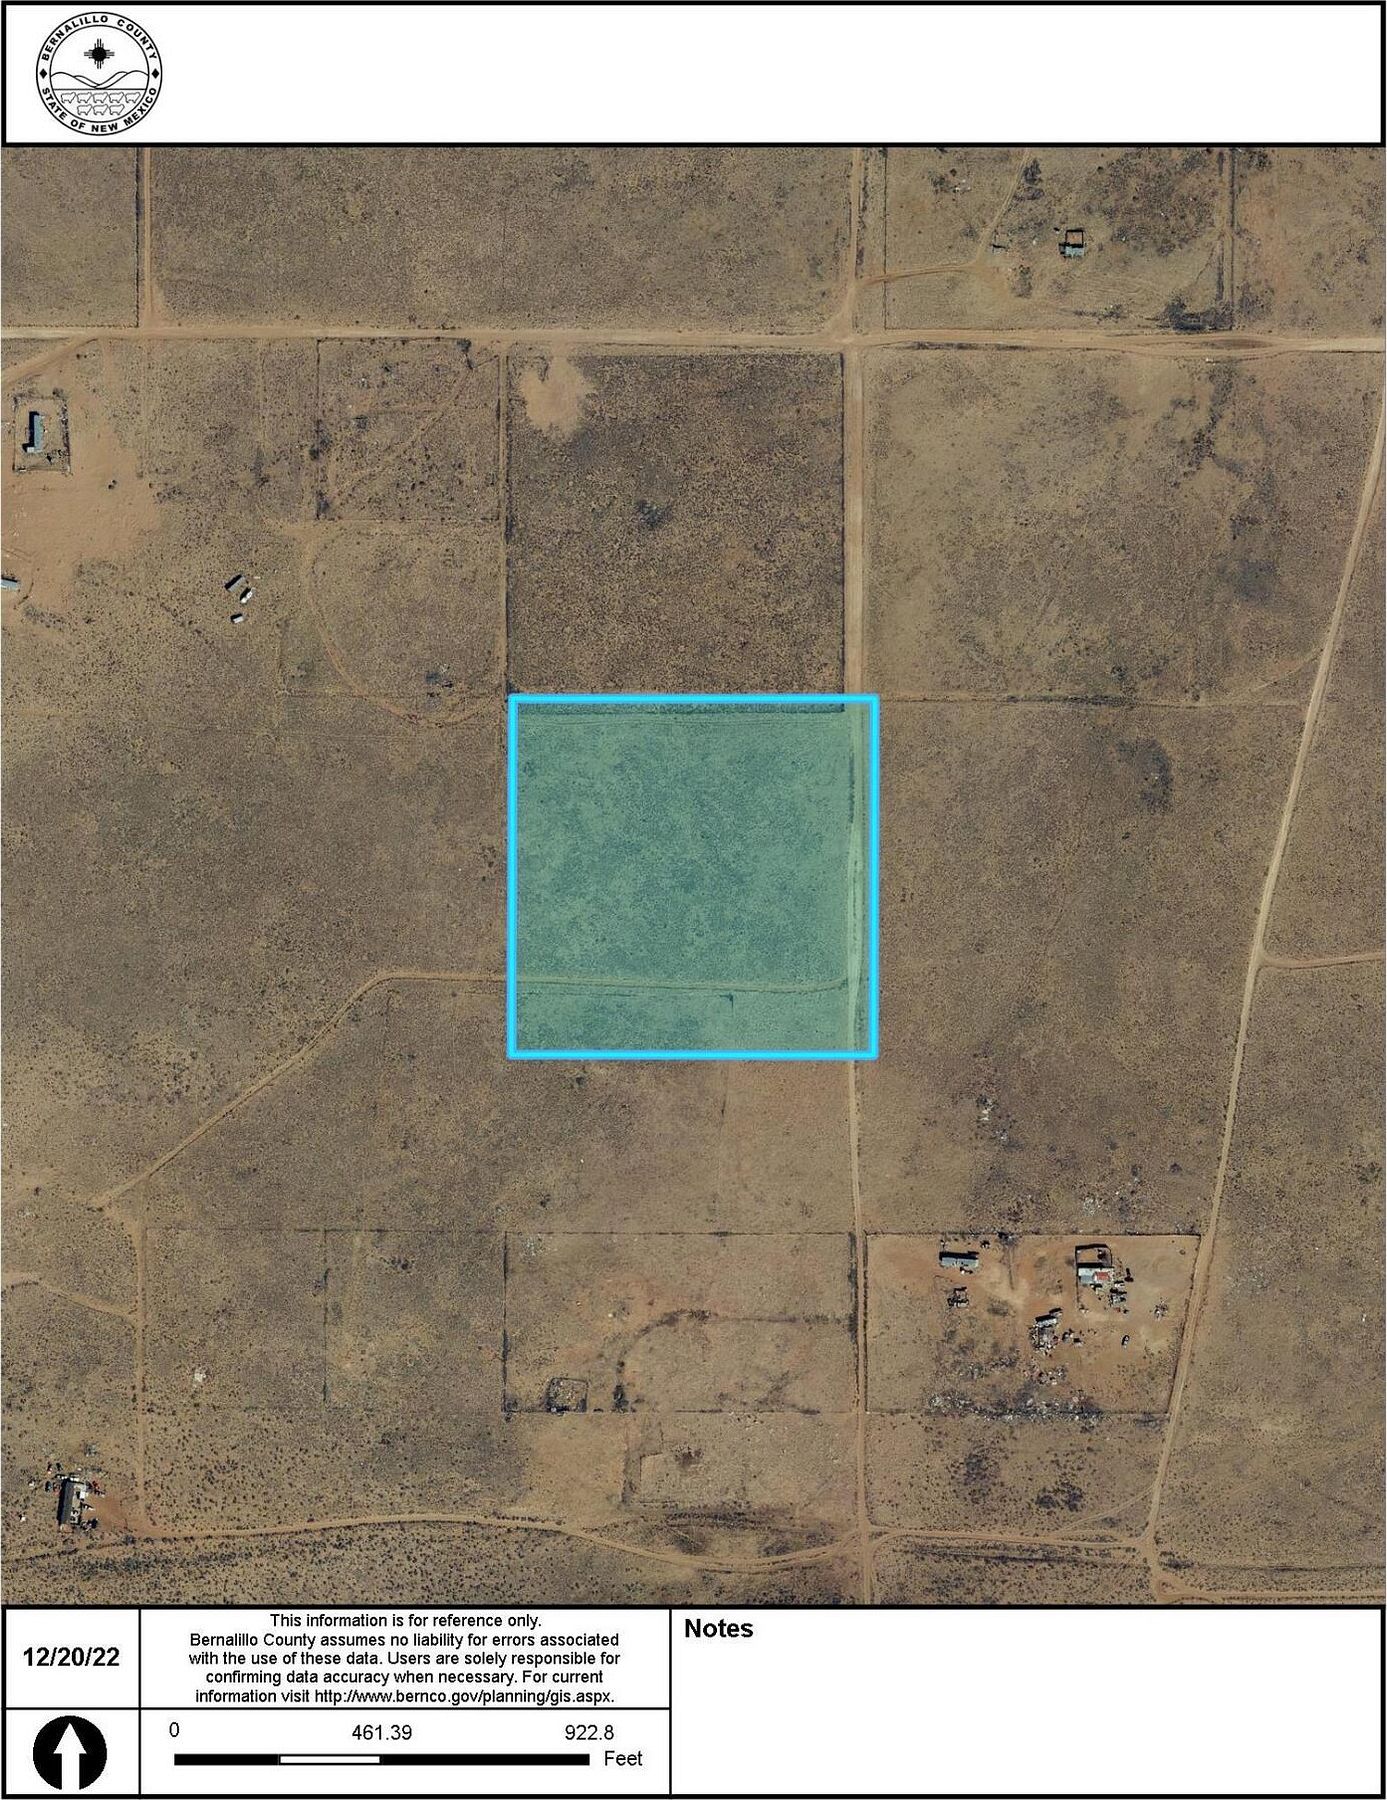 10 Acres of Land for Sale in Albuquerque, New Mexico